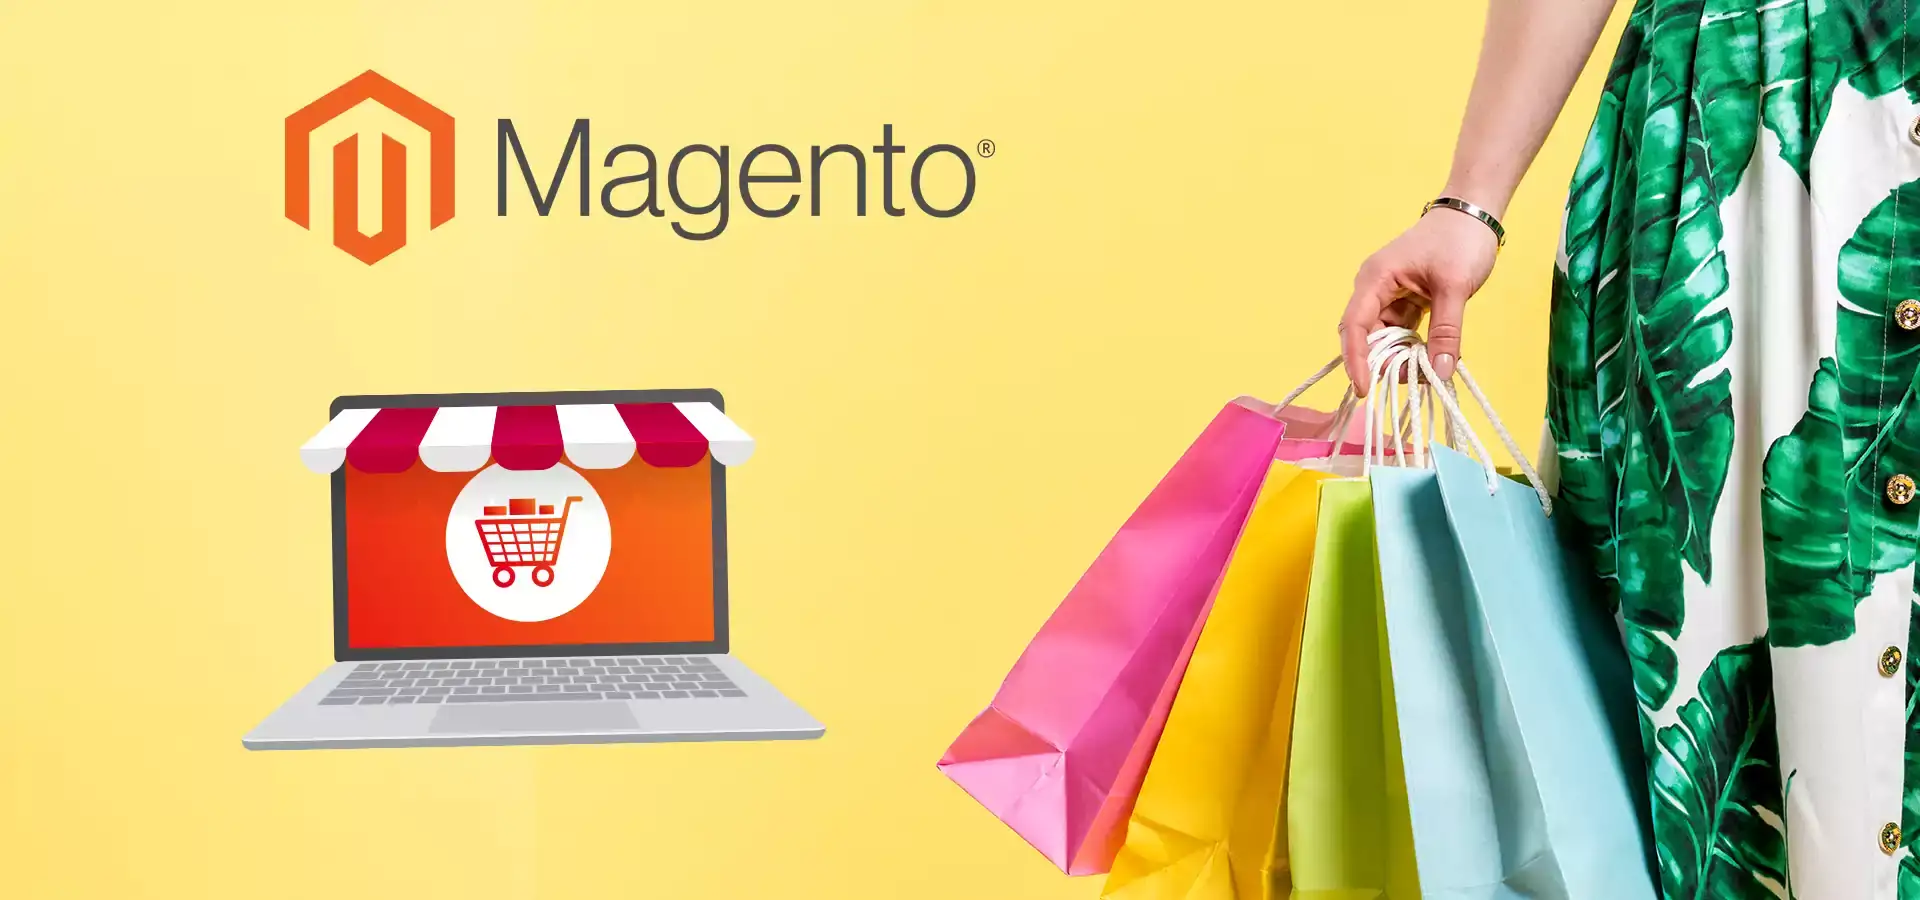 reasons-to-prove-that-magento-is-the-right-e-commerce-platform-category-page-image